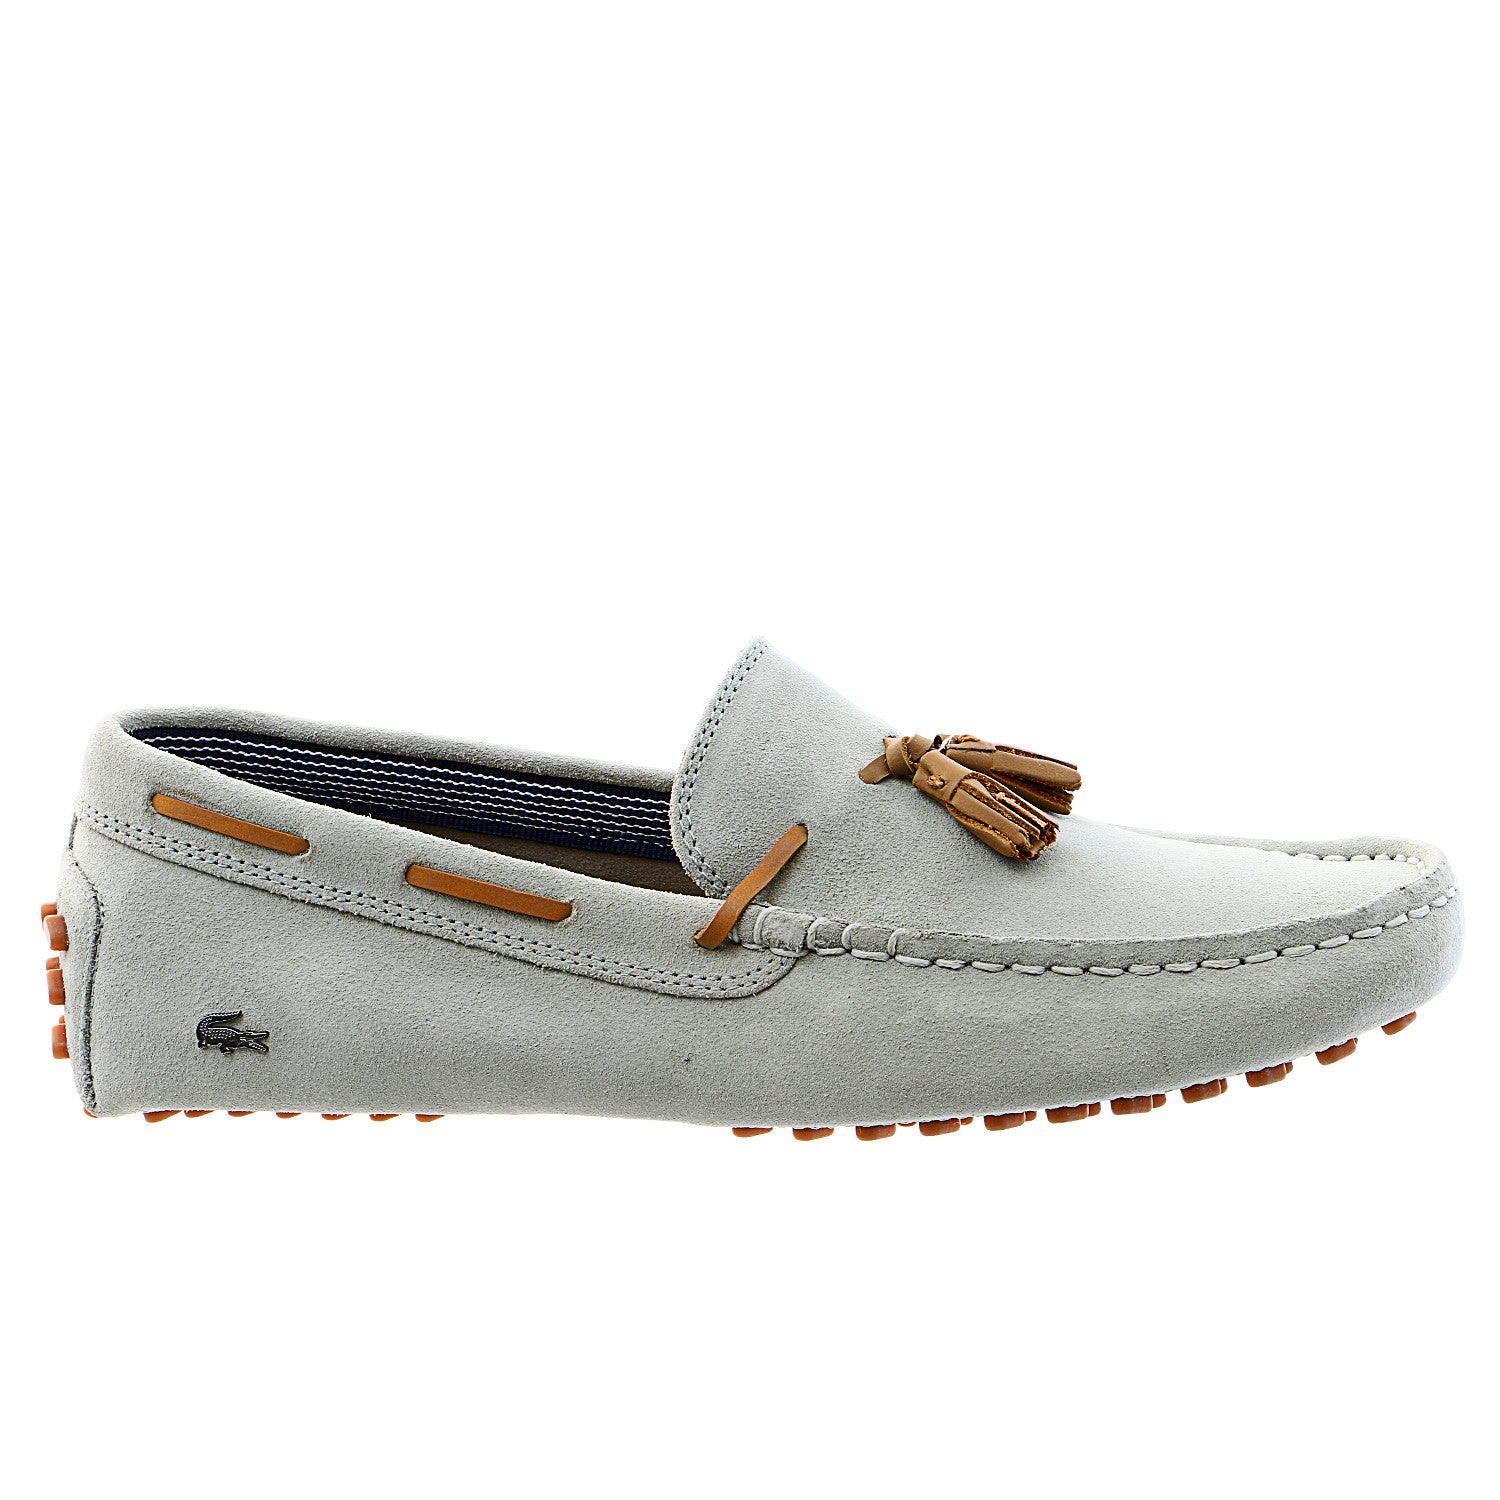 Lacoste Concours Tassle 7 Moccasin Driver Loafer Shoe - Navy - Mens -  Shoplifestyle